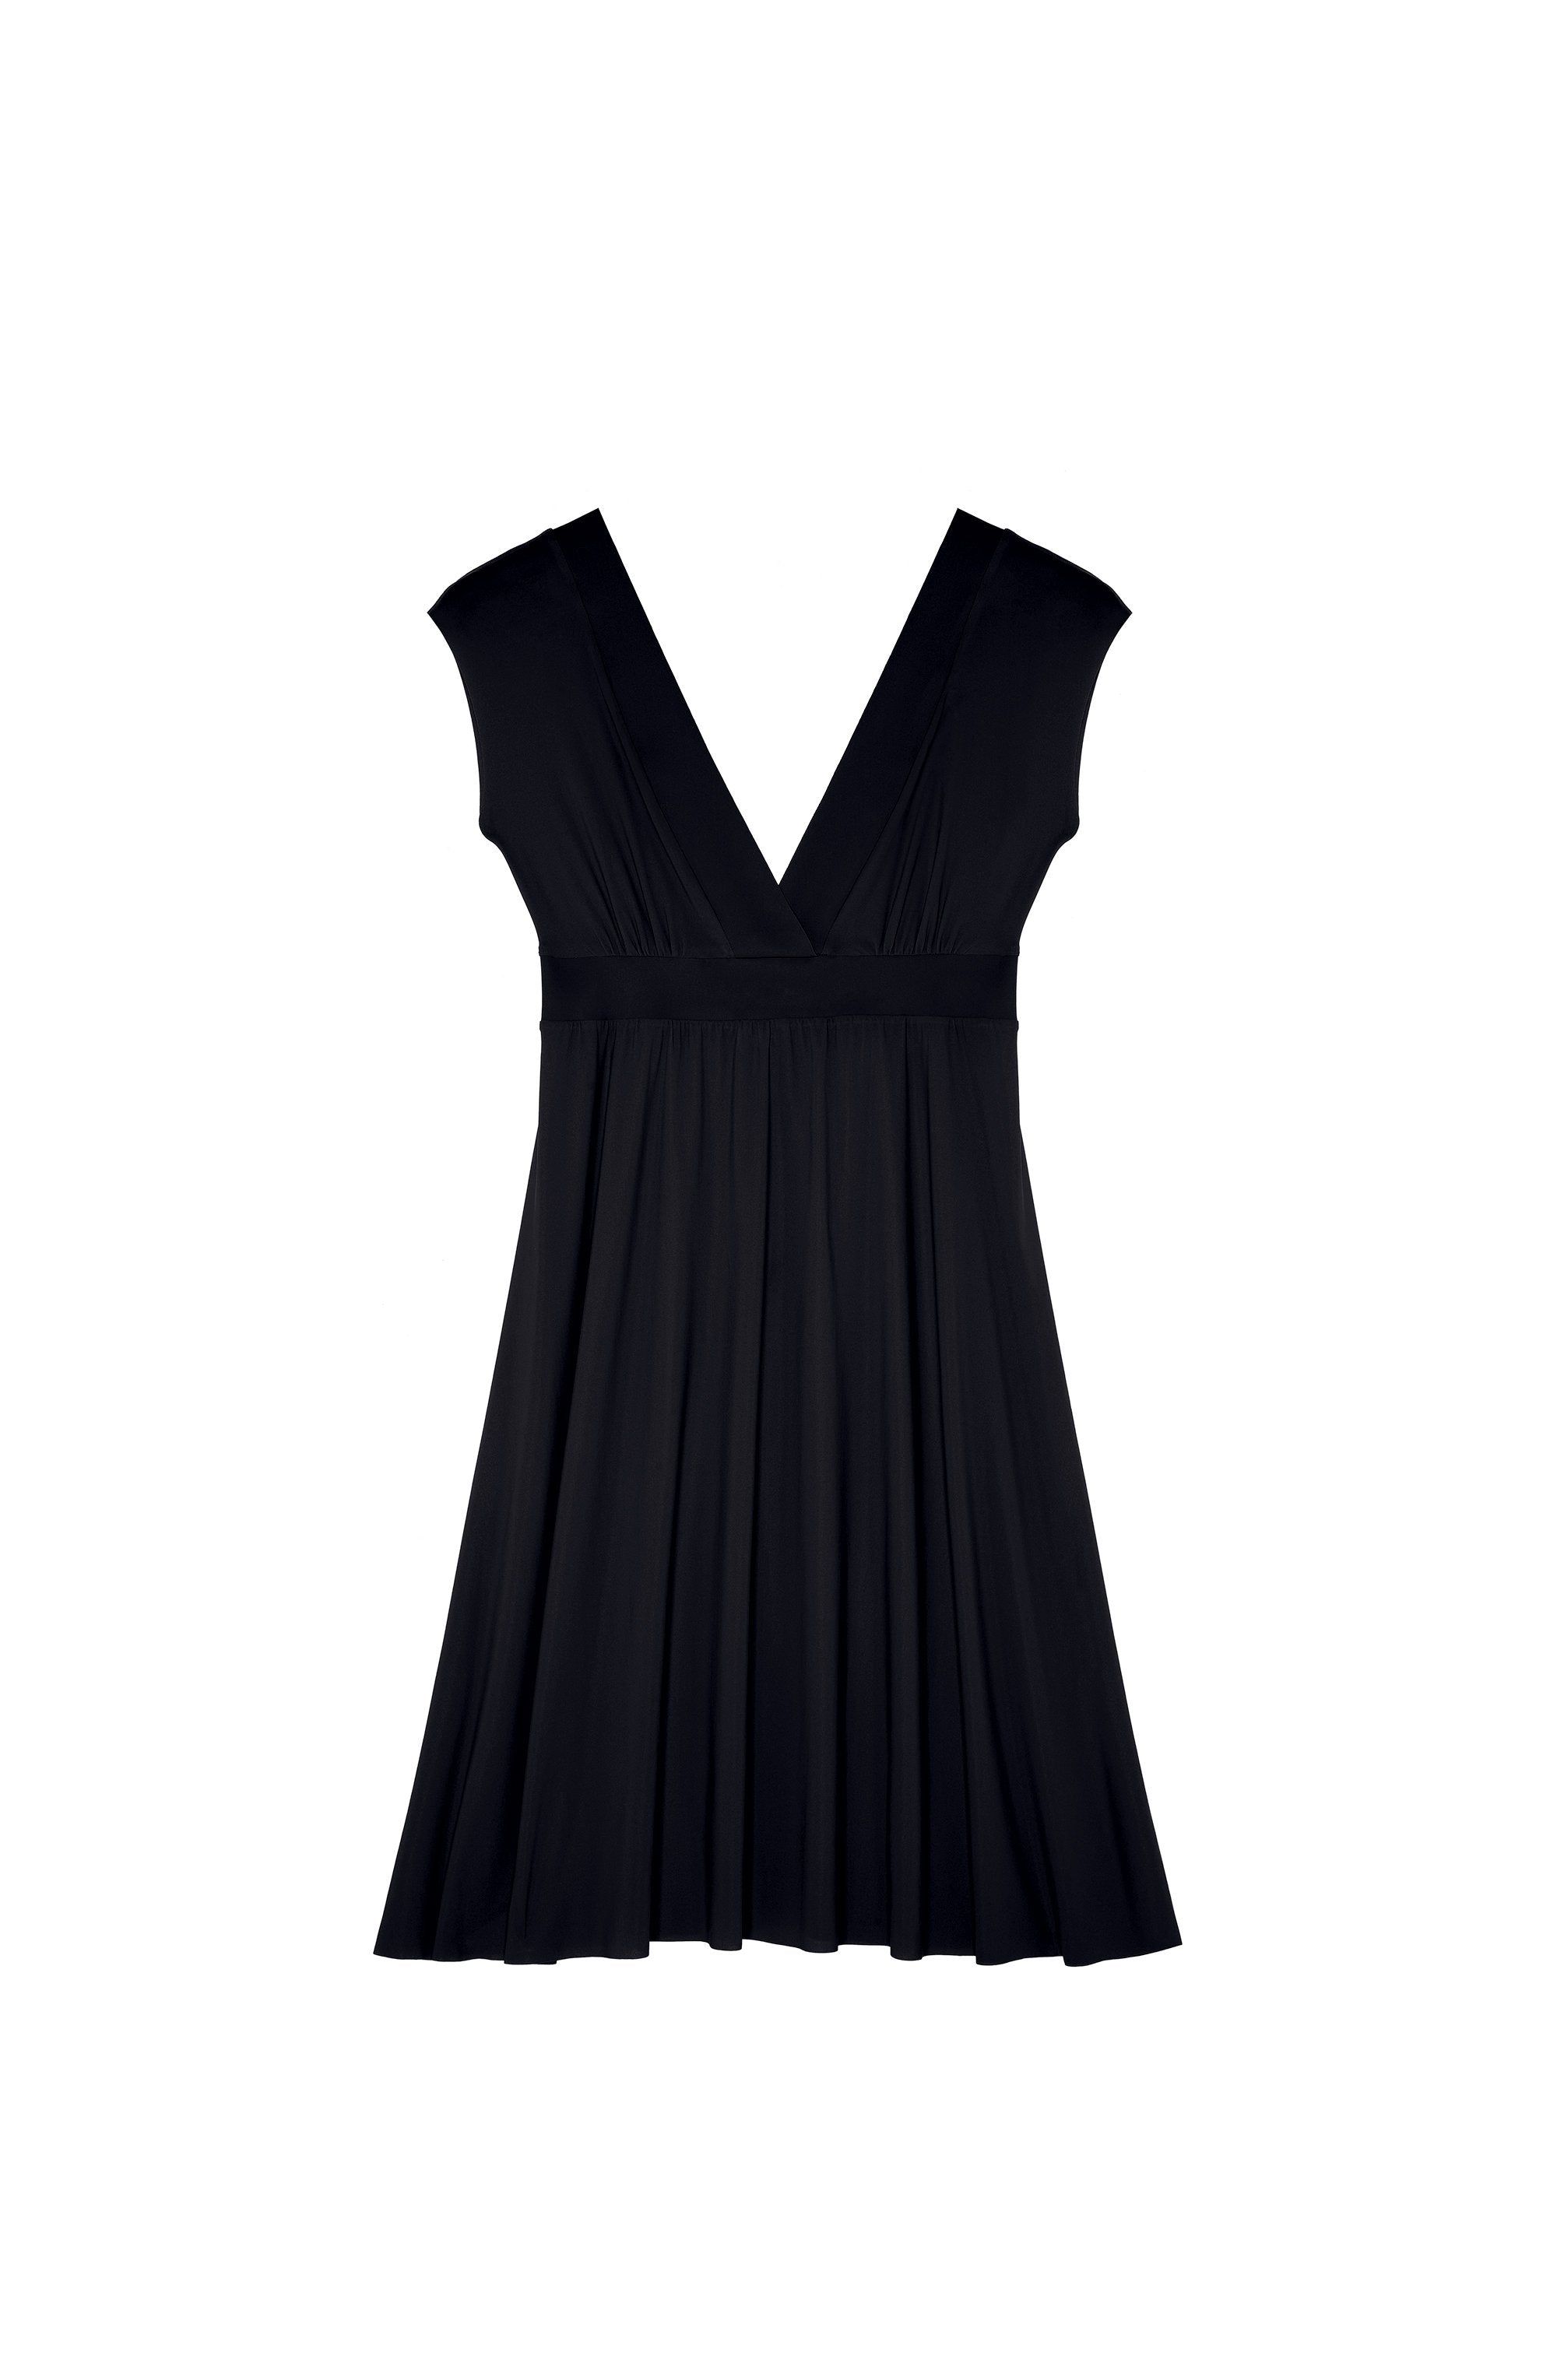 jalis - Black fitted dress